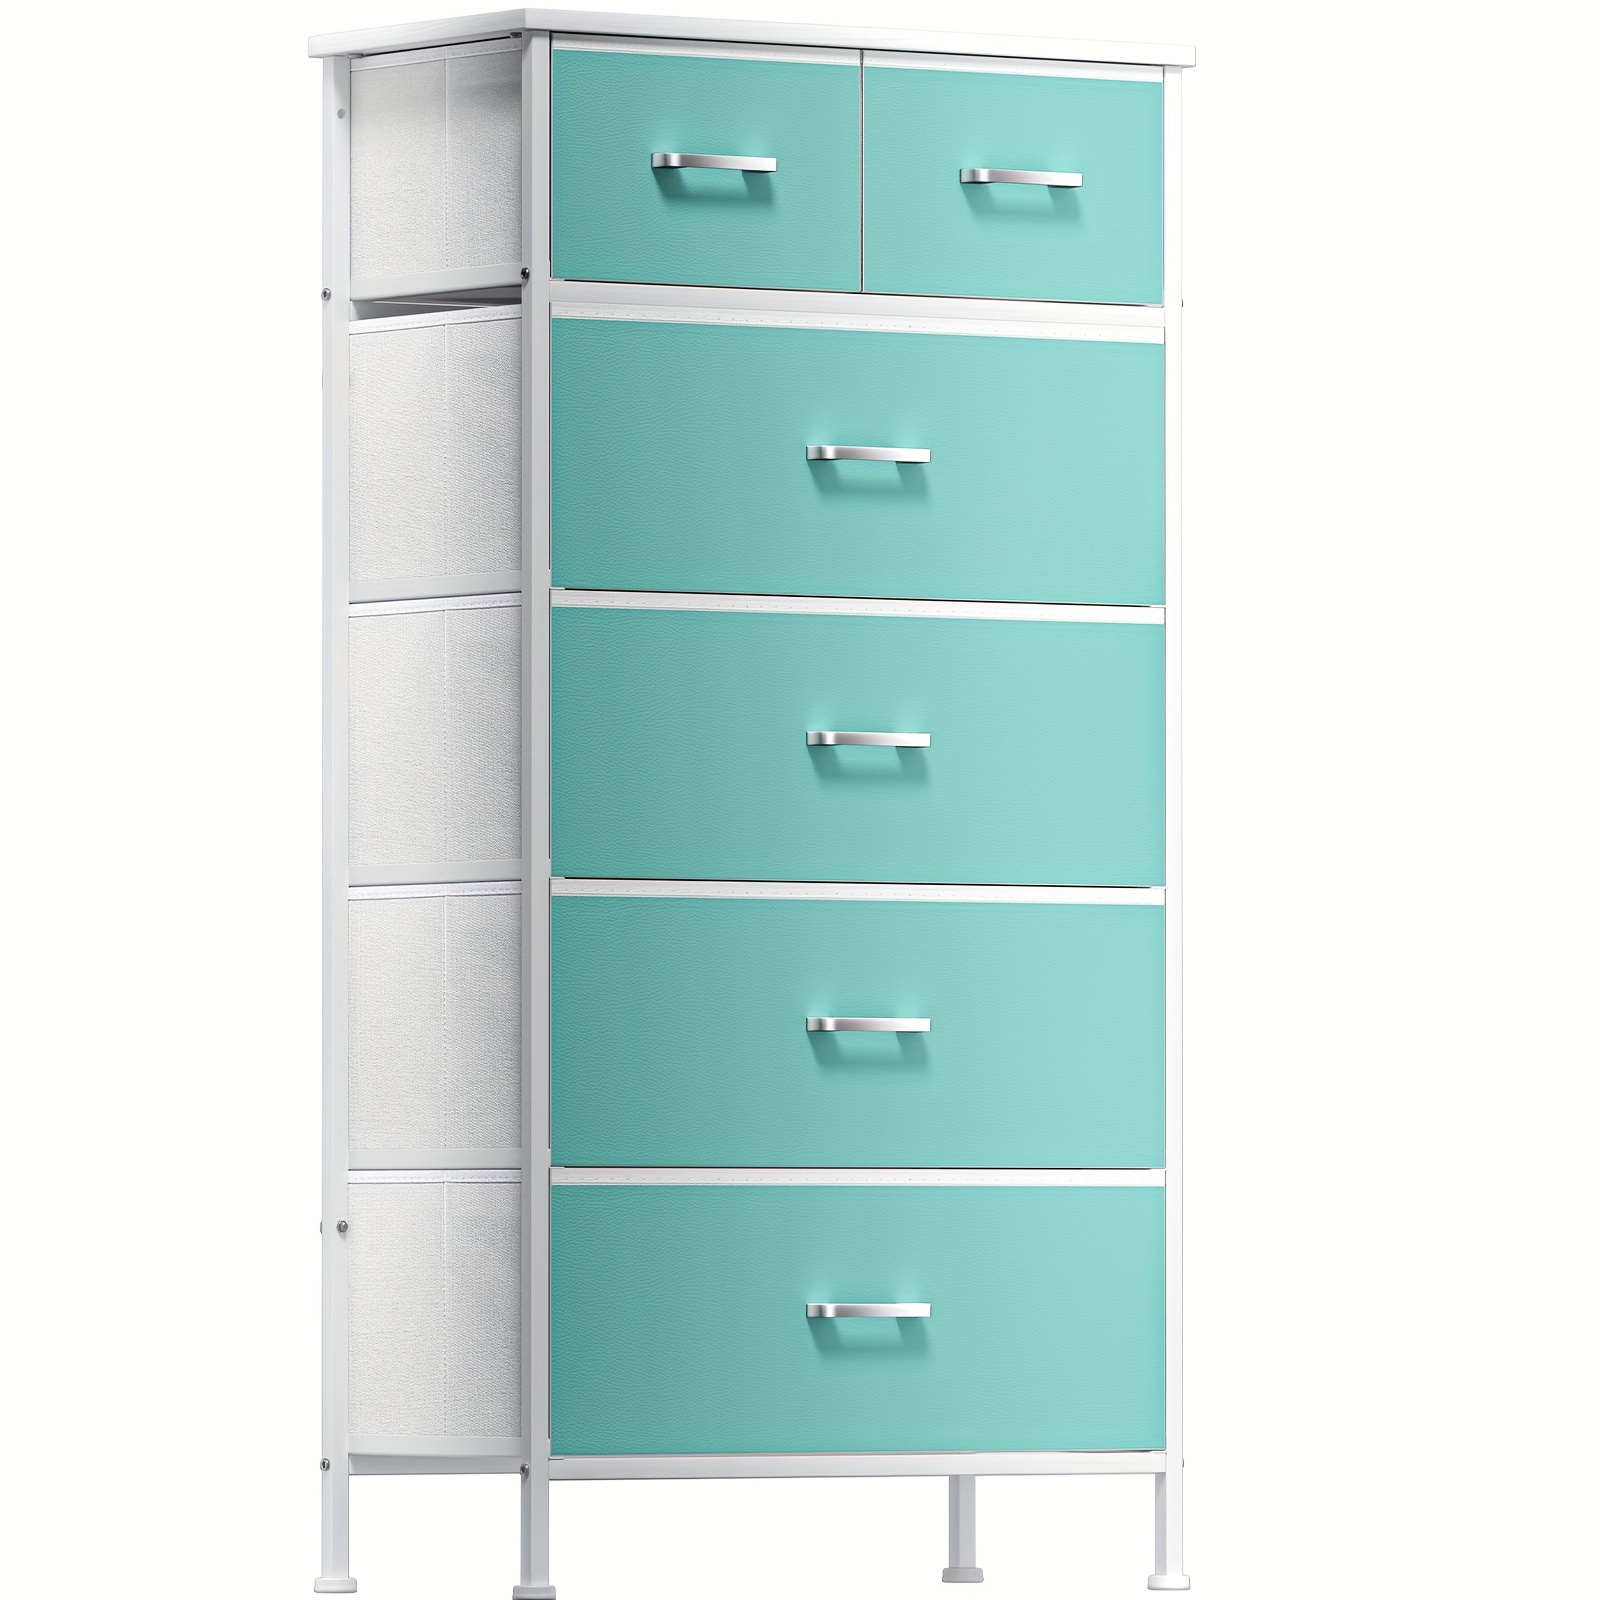 

Tall Dresser For Bedroom With 6 Drawers, Storage Tower Cyan Dresser For Closet, Living Room, Office, Chest Of Drawers With Metal Handle, Leather Front, Aqua Blue